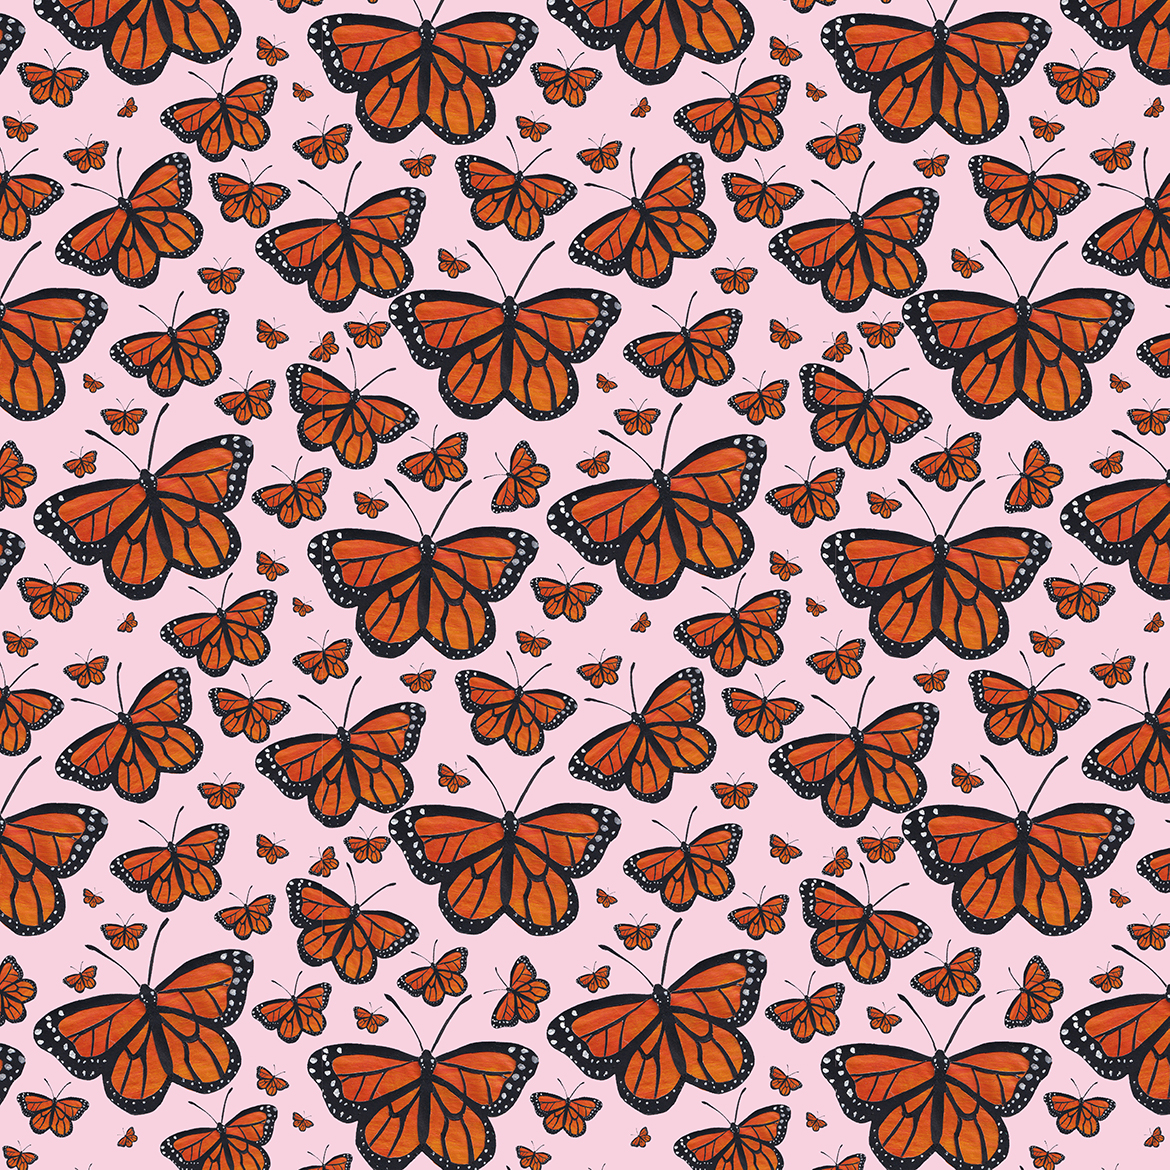 Pattern design inspired by monarch butterfly migration.